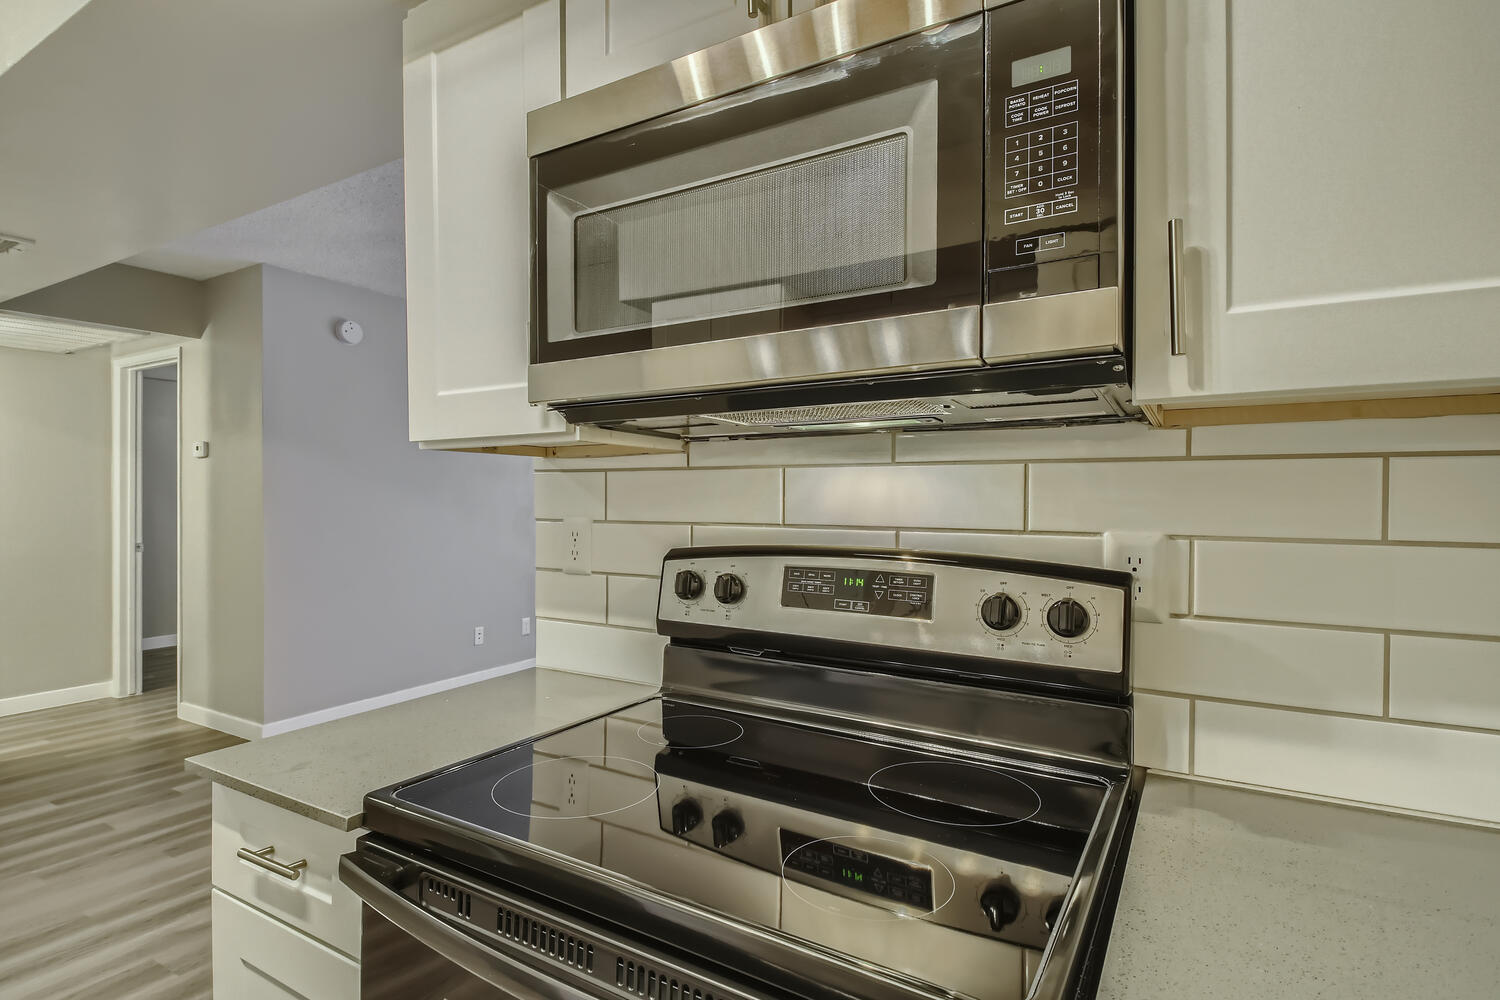 Rise North Ridge stainless steel microwave and oven in a kitchen.